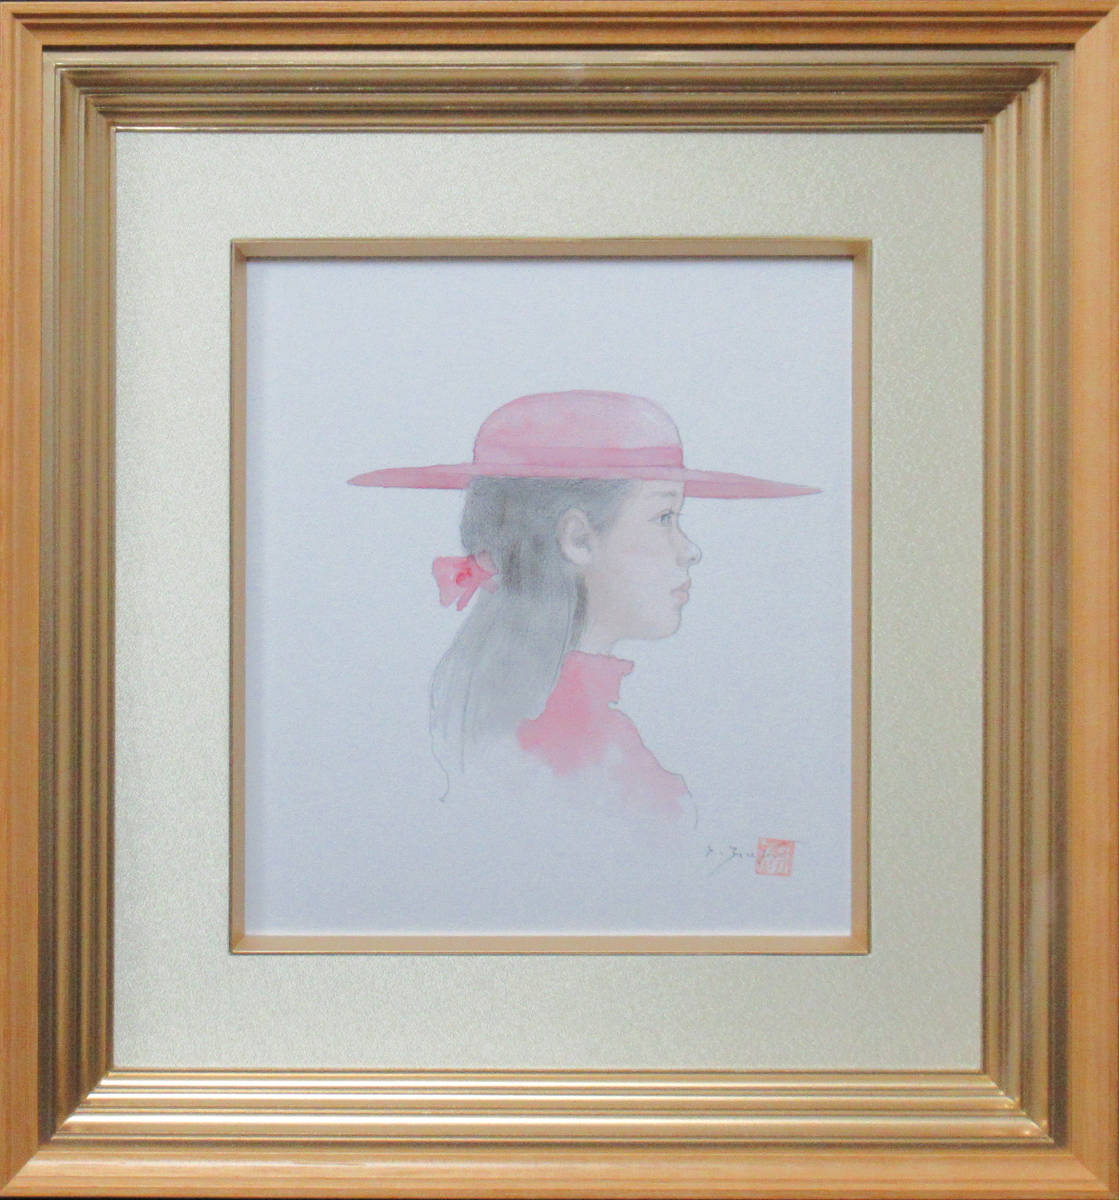 ★Tsutomu Fujii★ Guaranteed authentic Girl Born in Akita, watercolor on colored paper, Yasui Prize Exhibition Honorable Mention Award, many museums in Japan, a masterpiece by a popular realist artist, Painting, Oil painting, Portraits